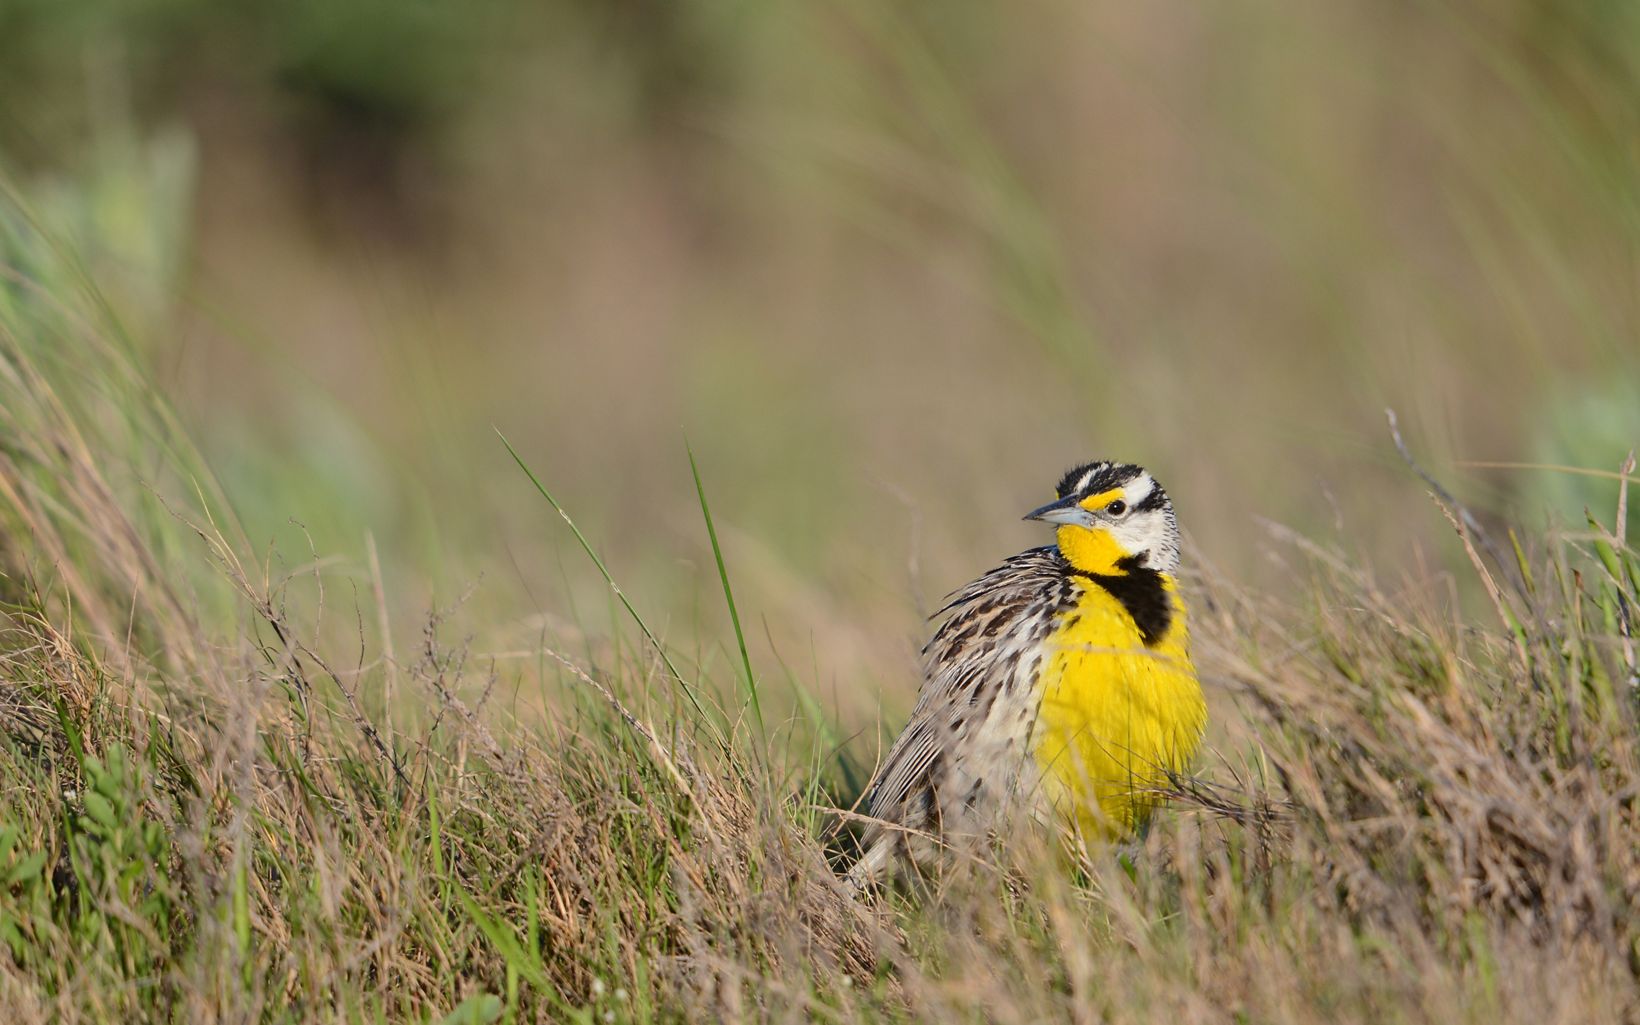 This is just one of the many grassland bird species whose populations are declining rapidly.